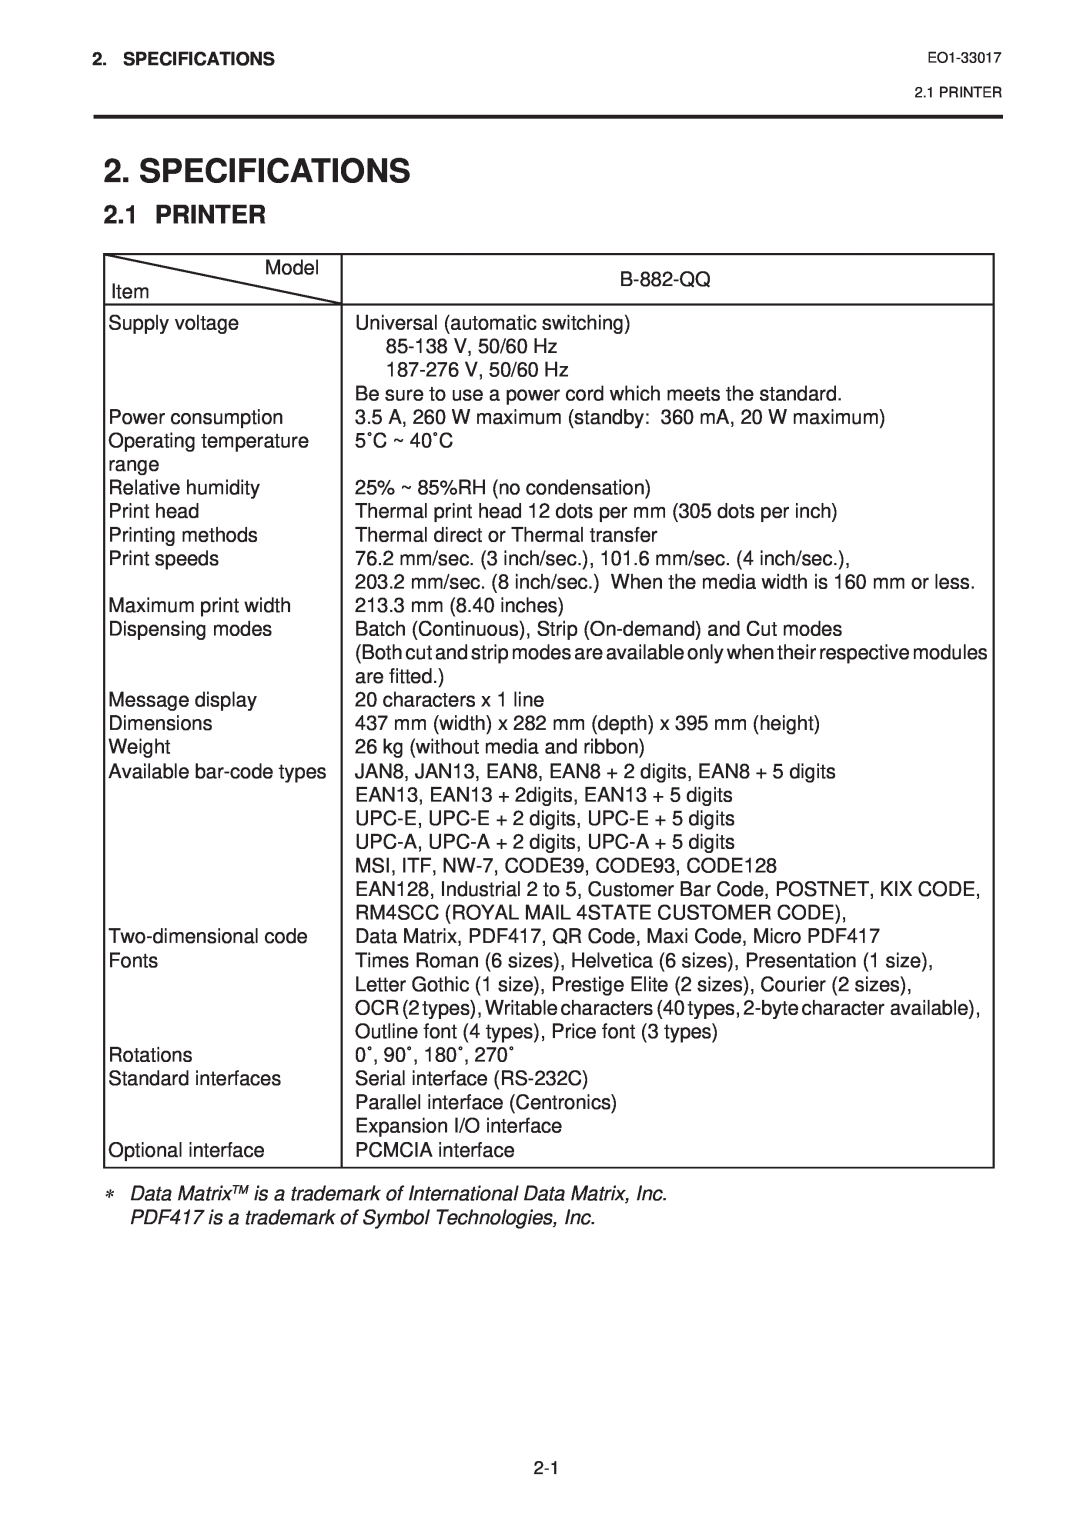 Toshiba B-880-QQ SERIES owner manual Specifications, Printer 